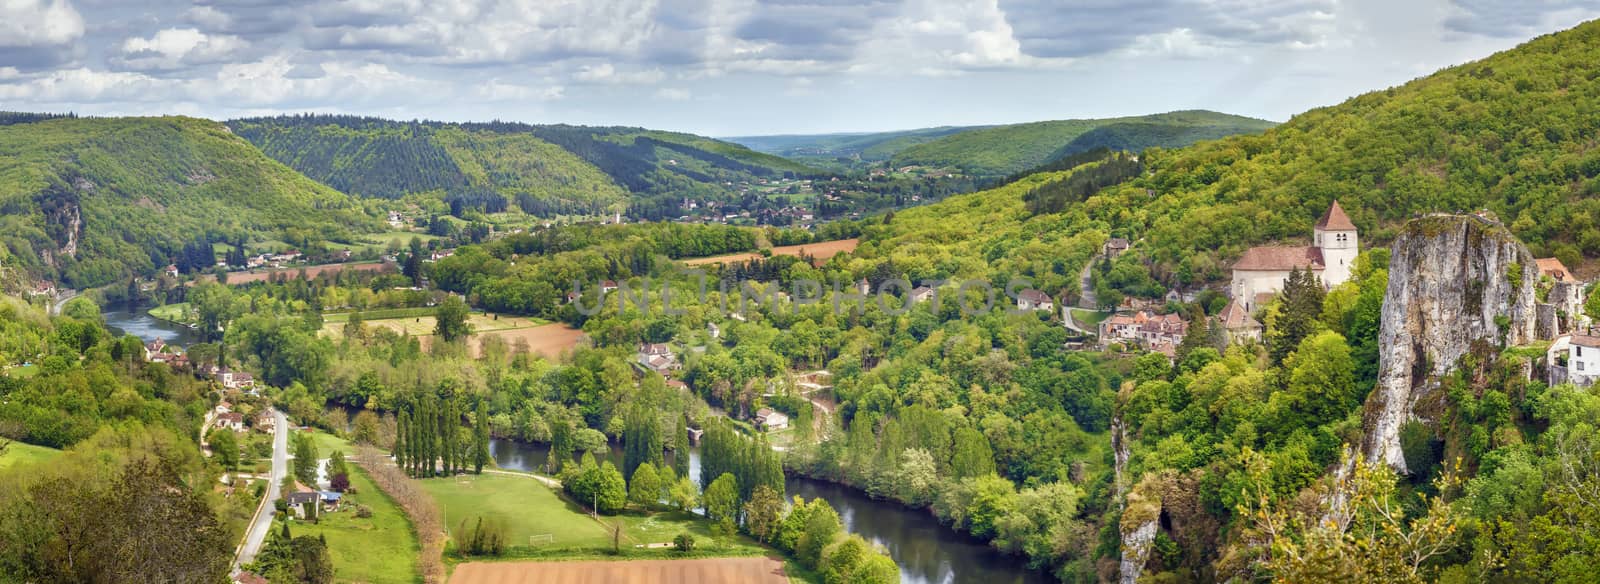 Panoramic landscape with Valley of Lot river and Saint-Cirq-Lapopie village, France